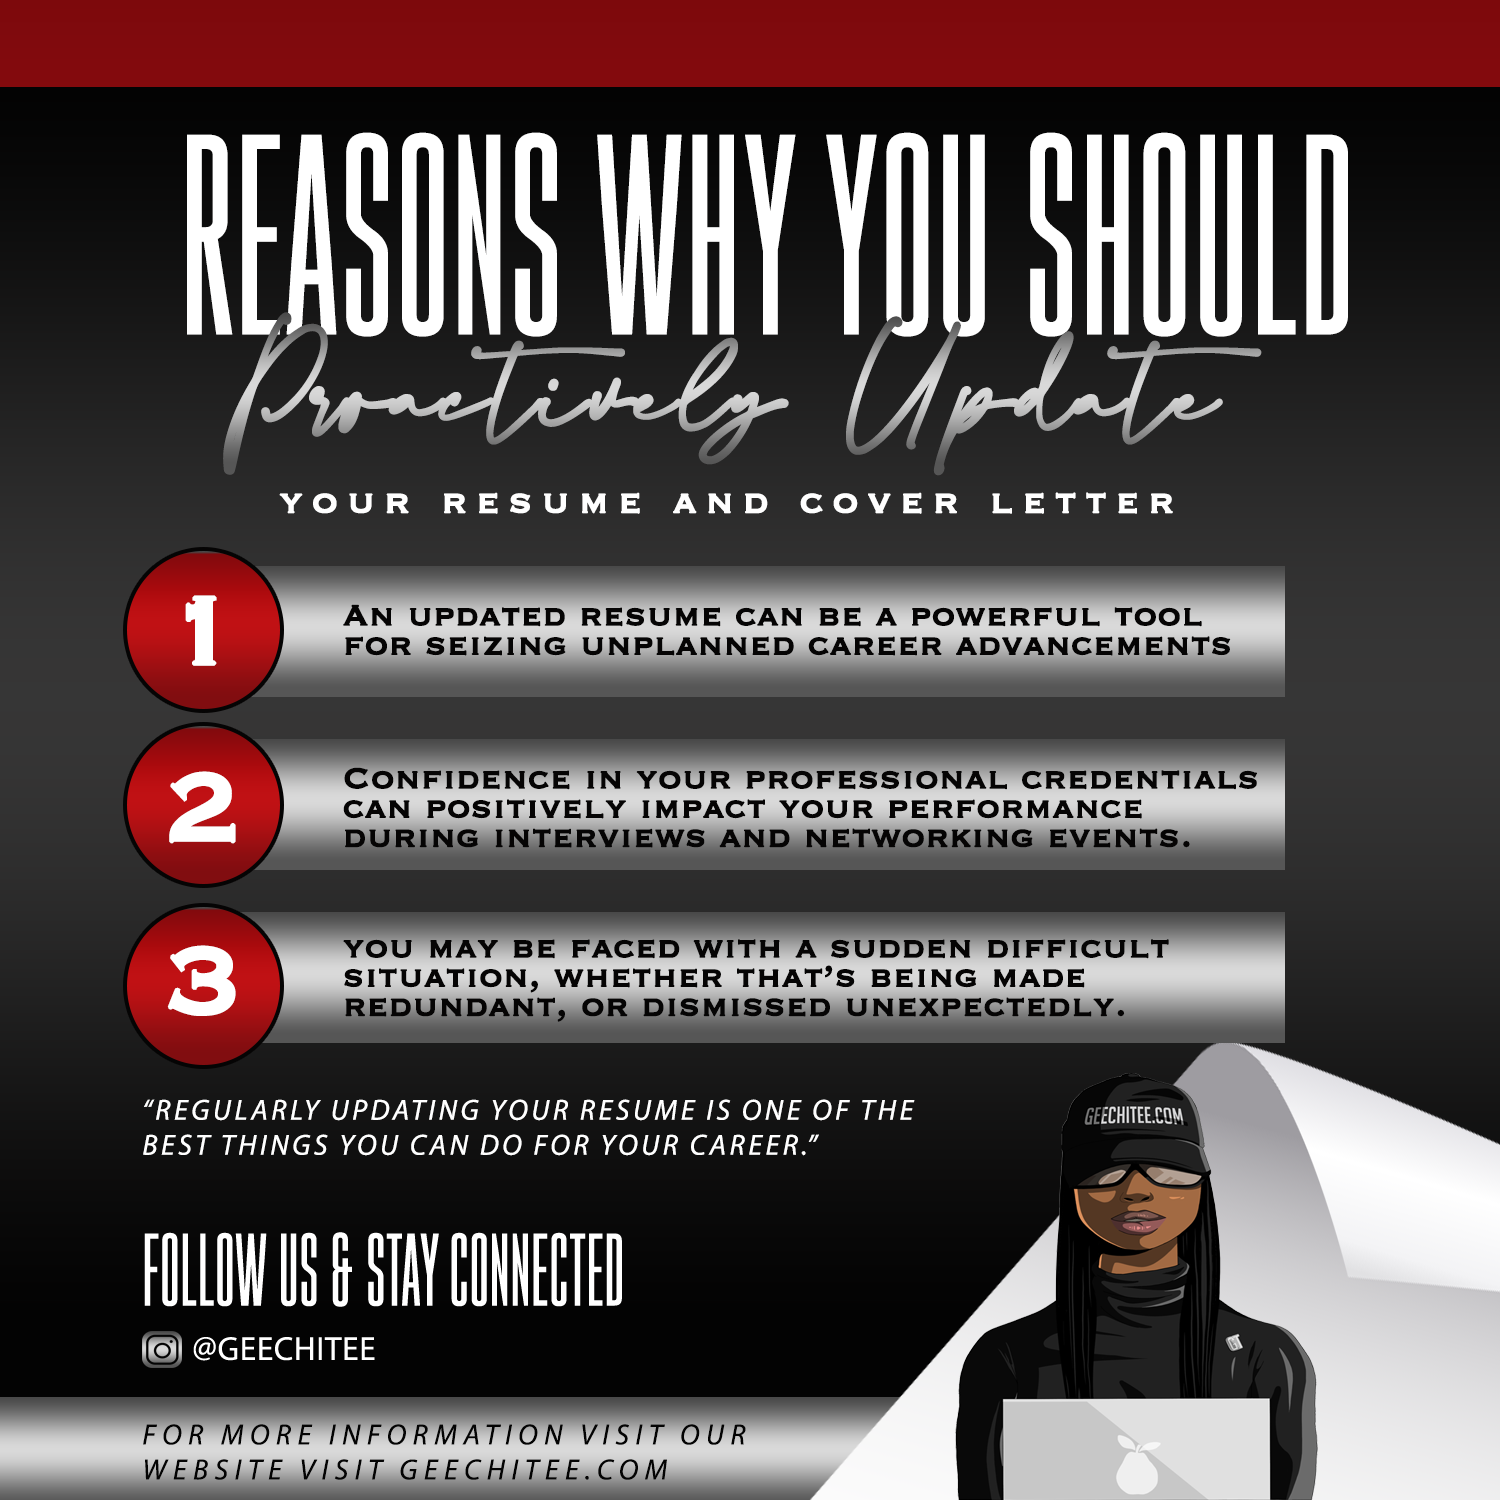 Reasons Why You Should Proactively Update your Resume.